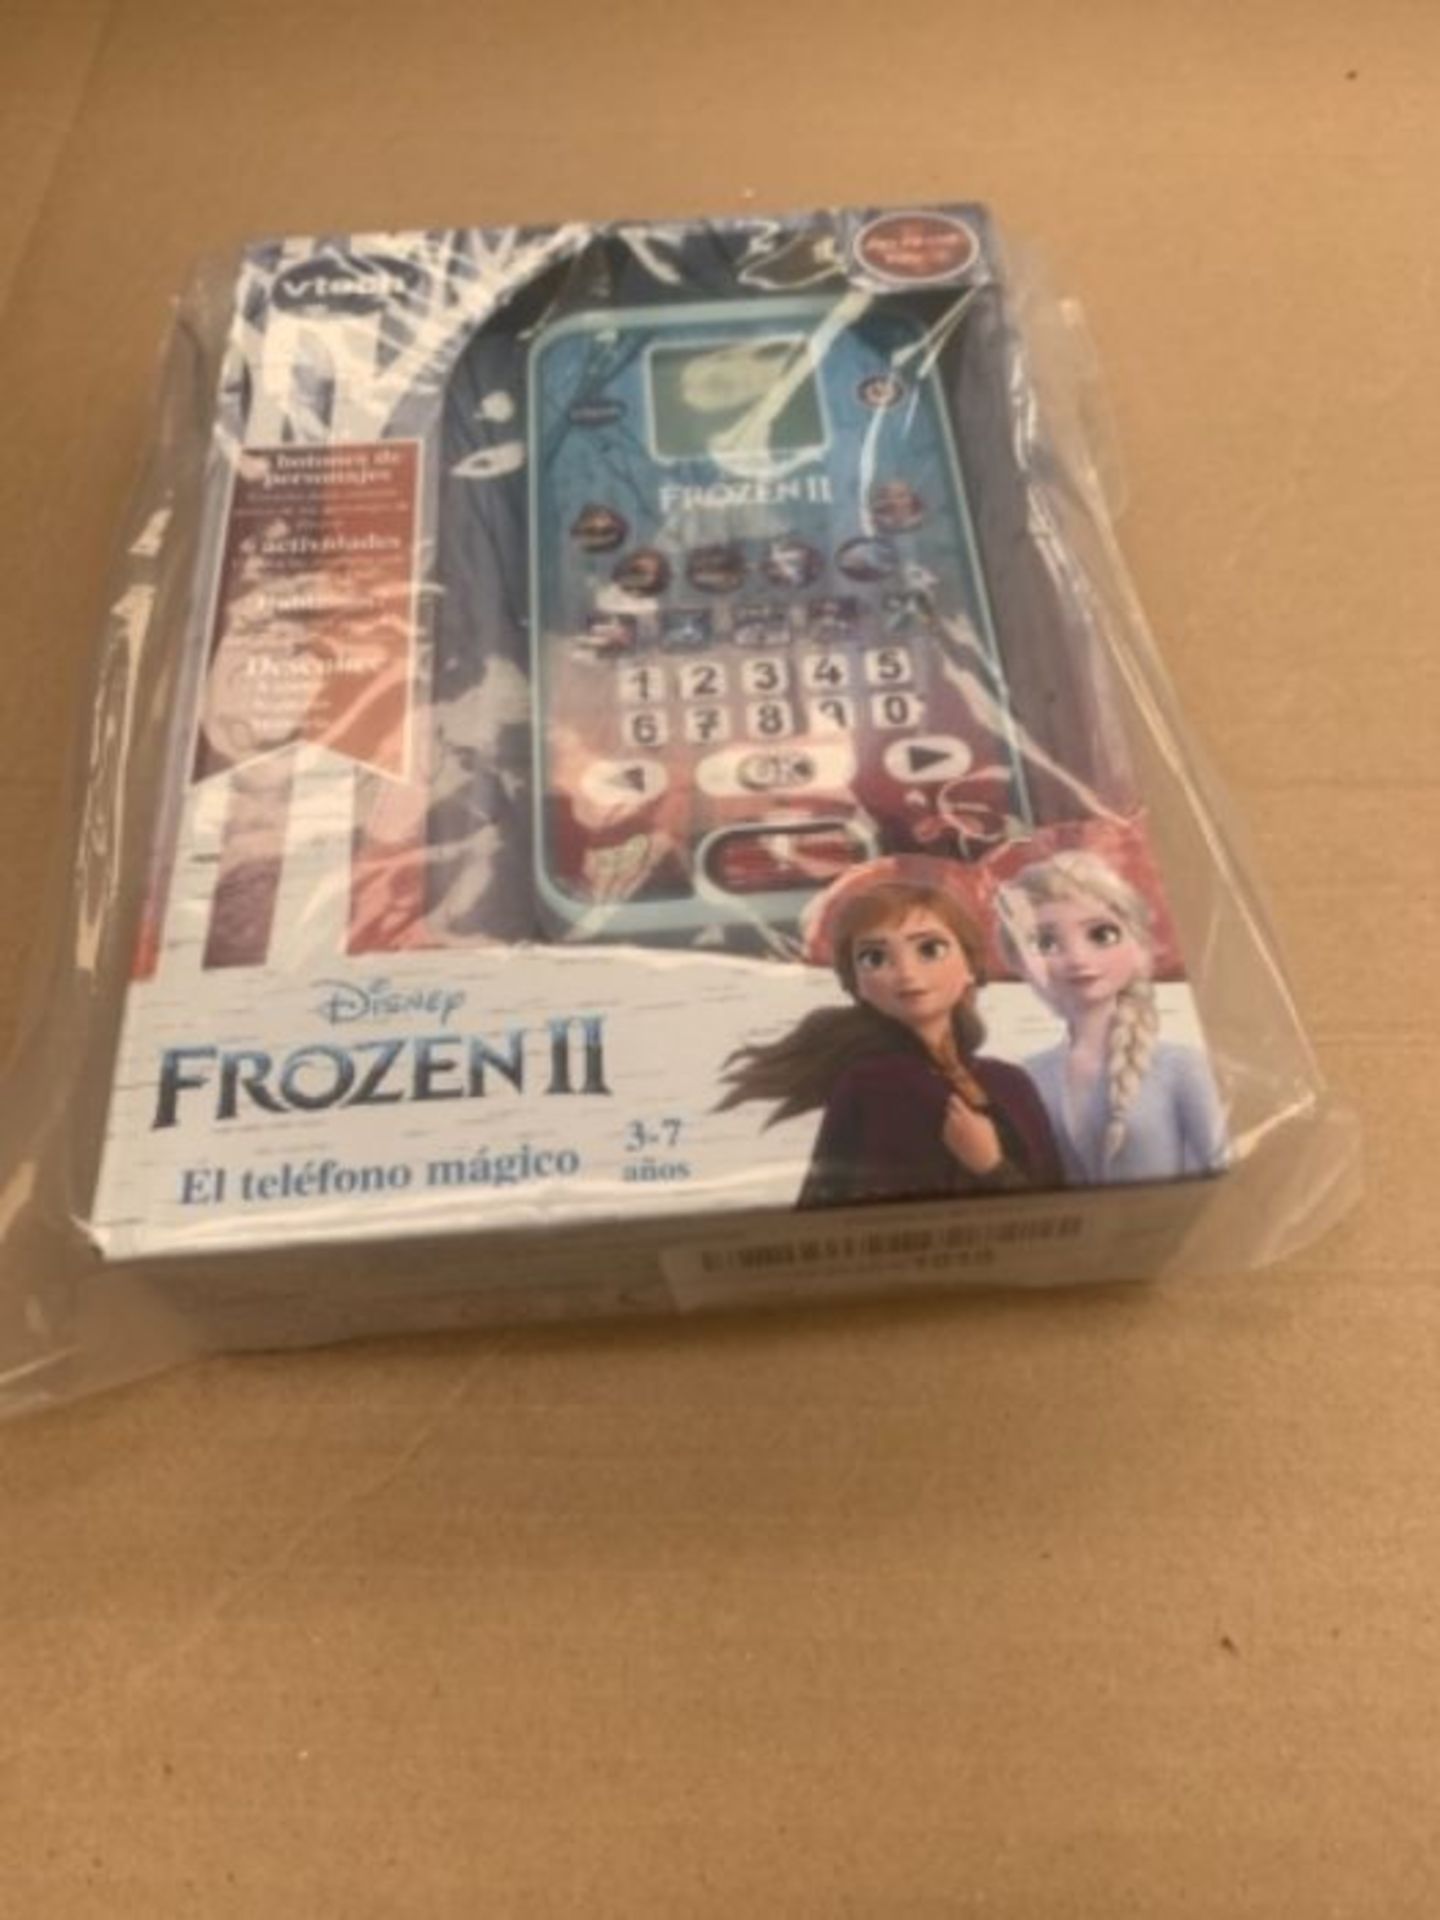 VTech- Frozen II Interactive Toy Phone, Multicoloured (3480-526122) - Image 2 of 2